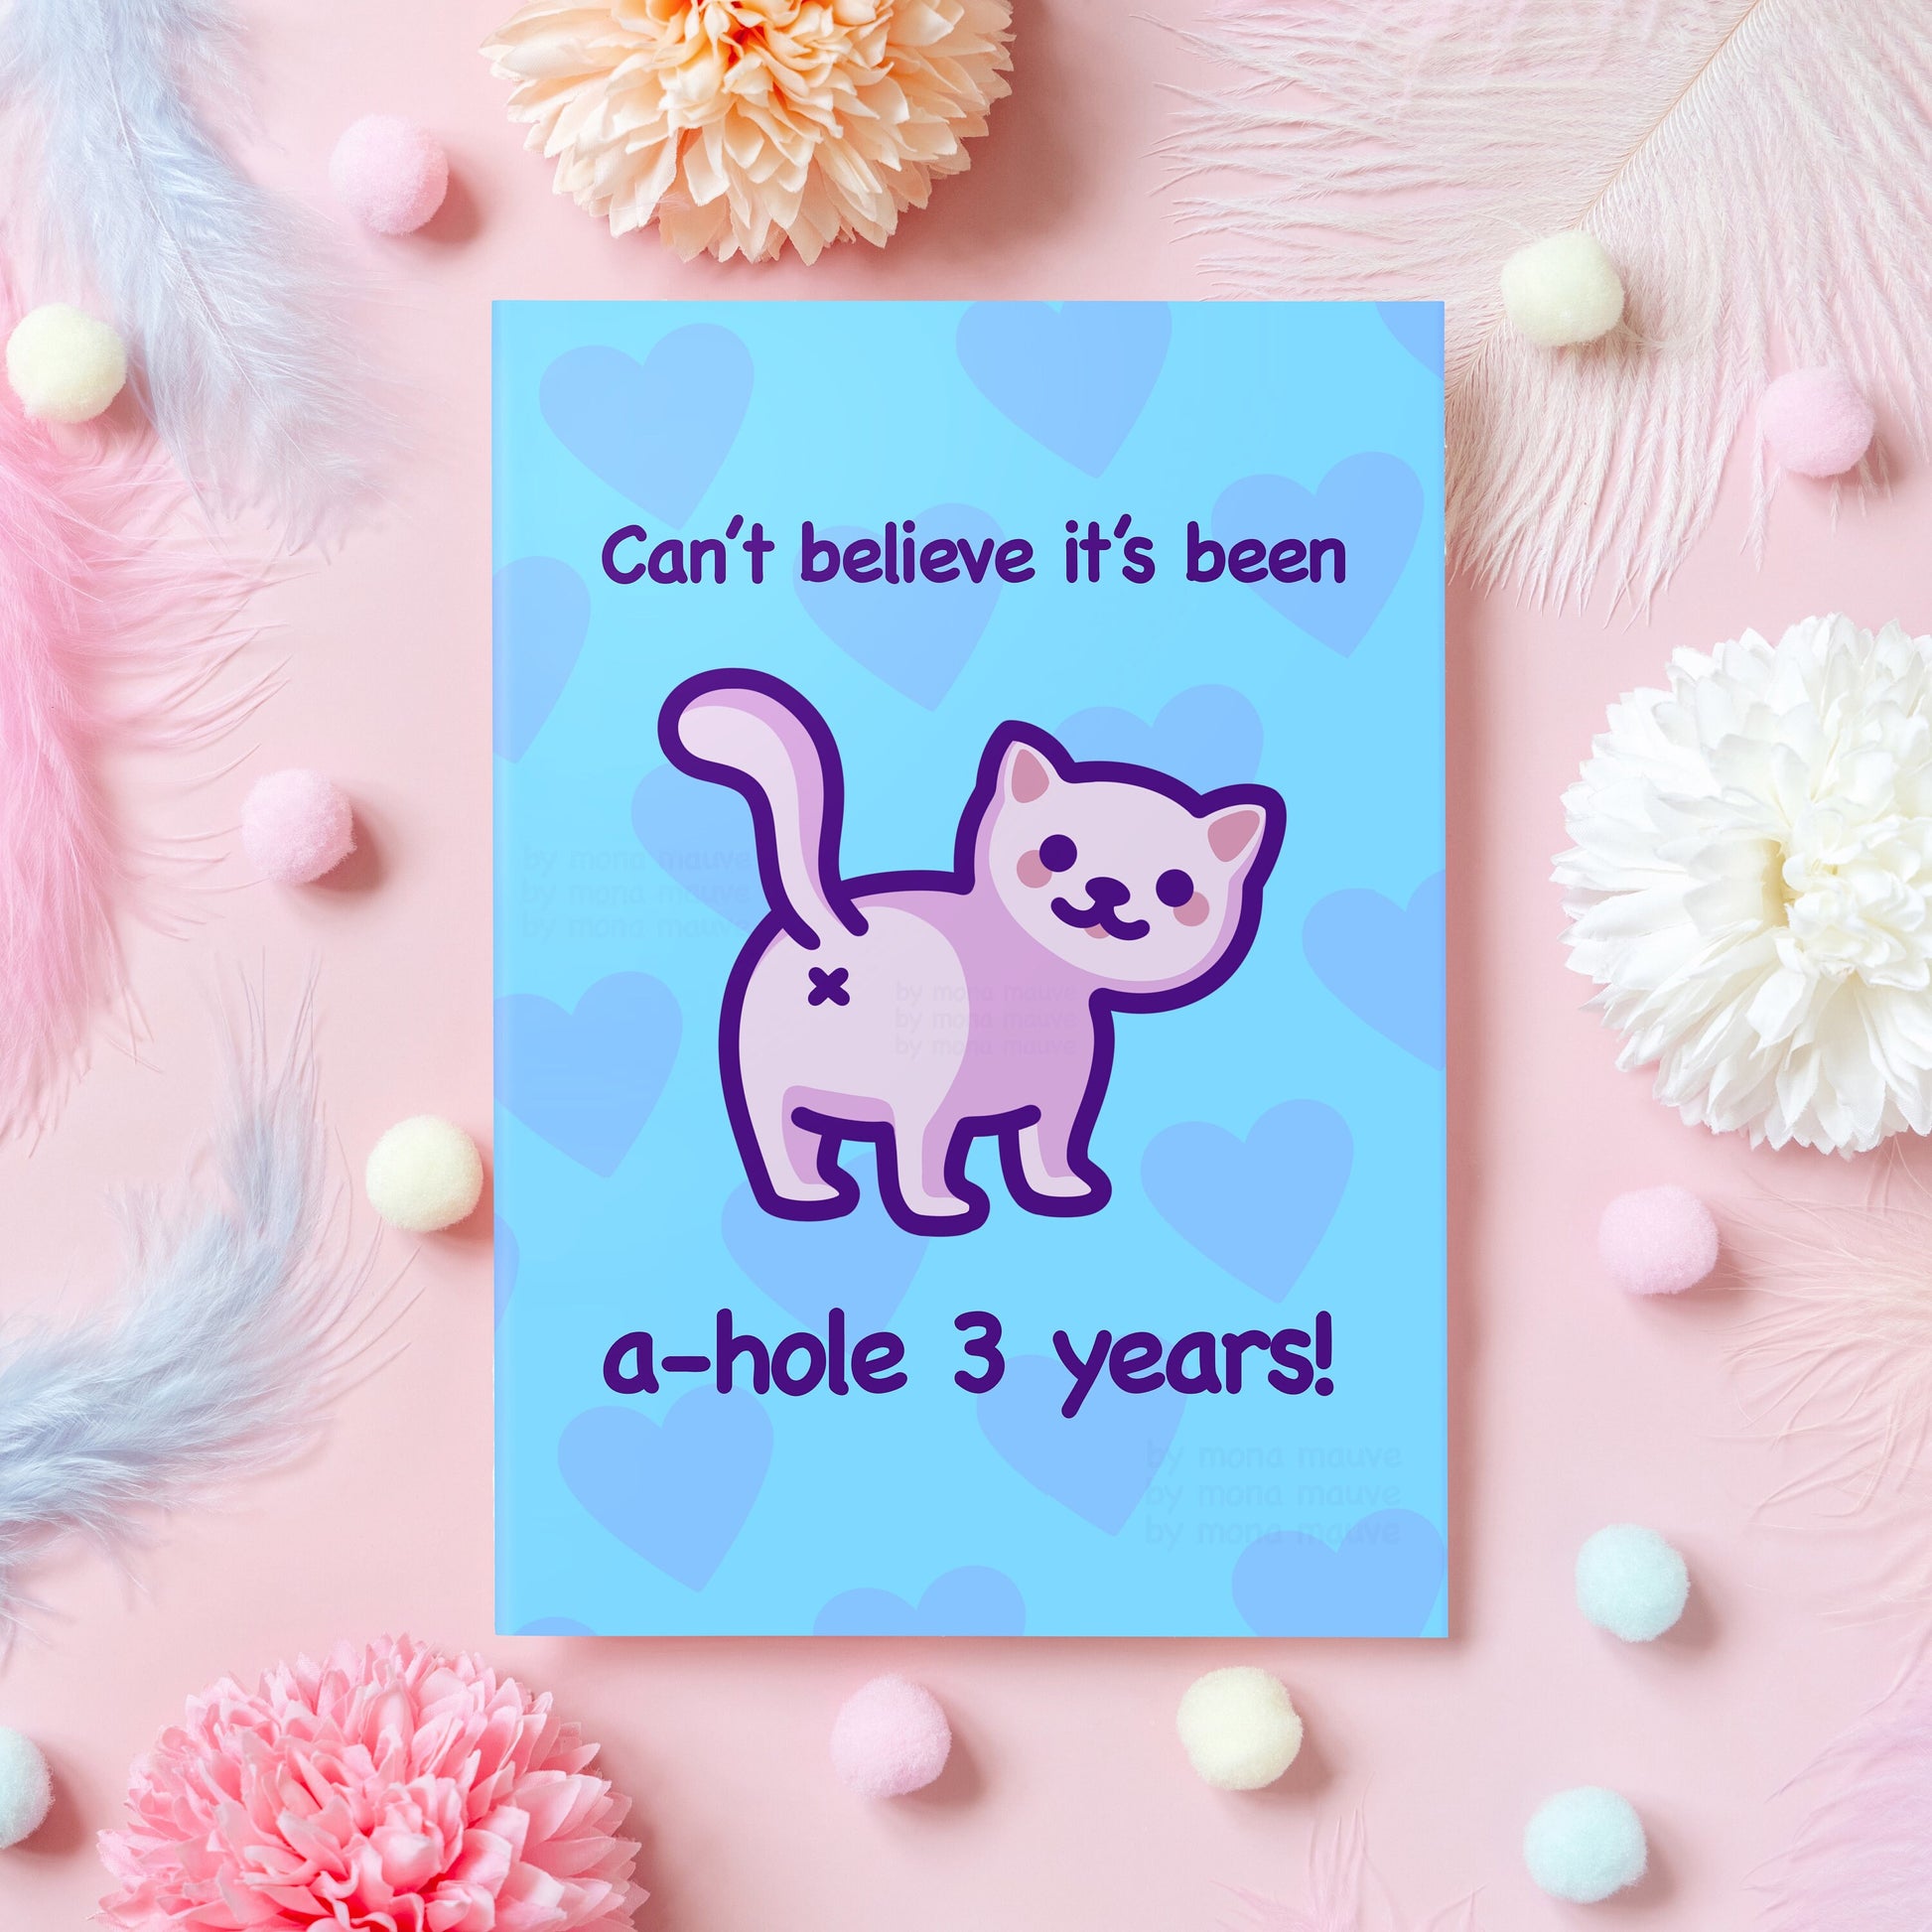 3 year anniversary greeting card with a funny illustration of a white cat with his butt facing the viewer. The card reads: "Can't believe it's been a-hole 3 years!"